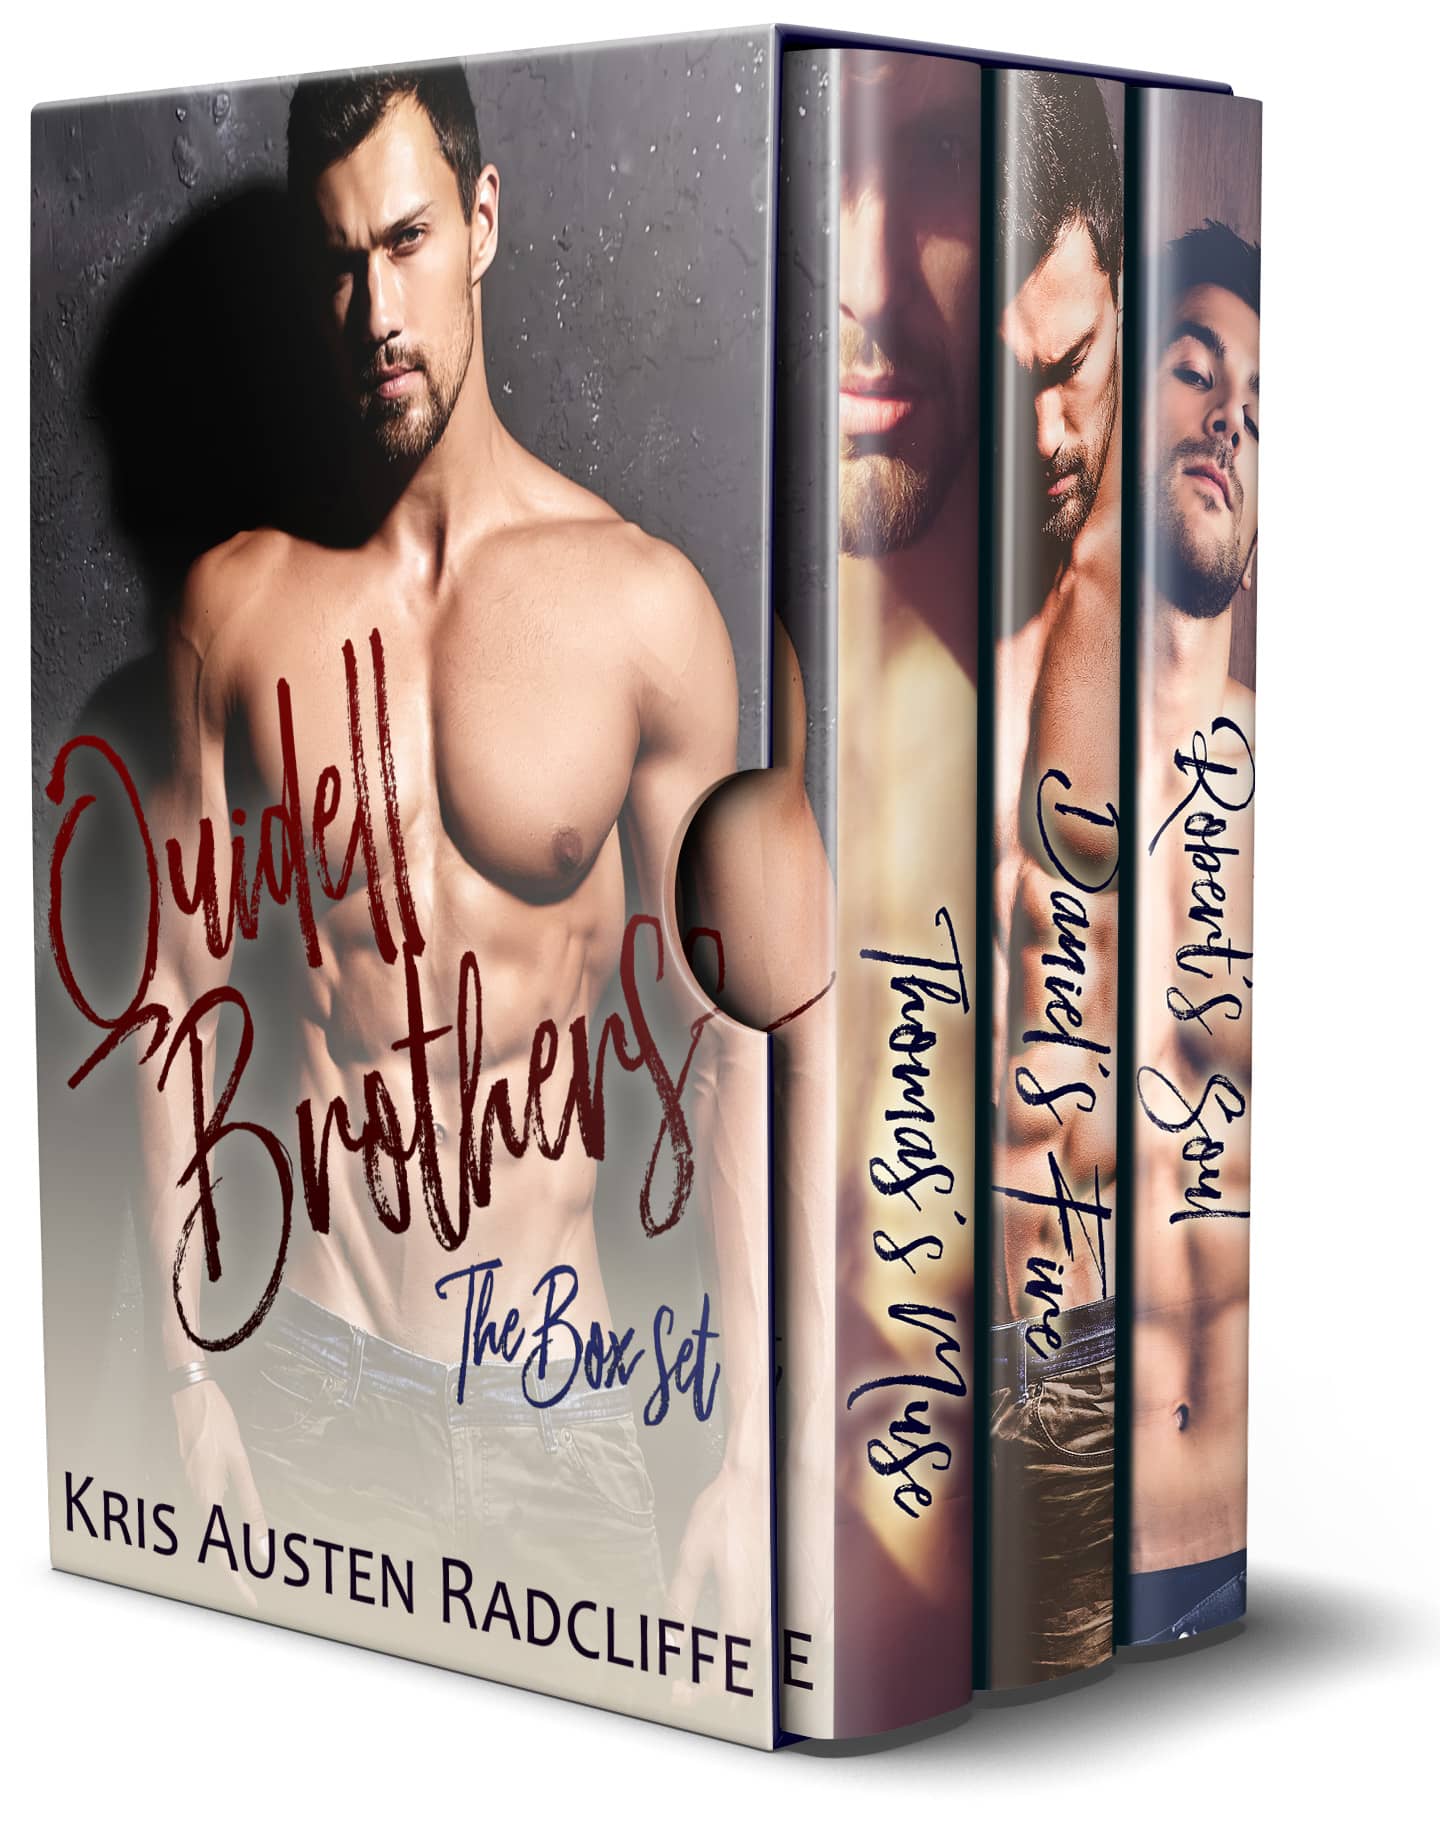 Quidell Brothers Box Set by Kris Austen Radcliffe